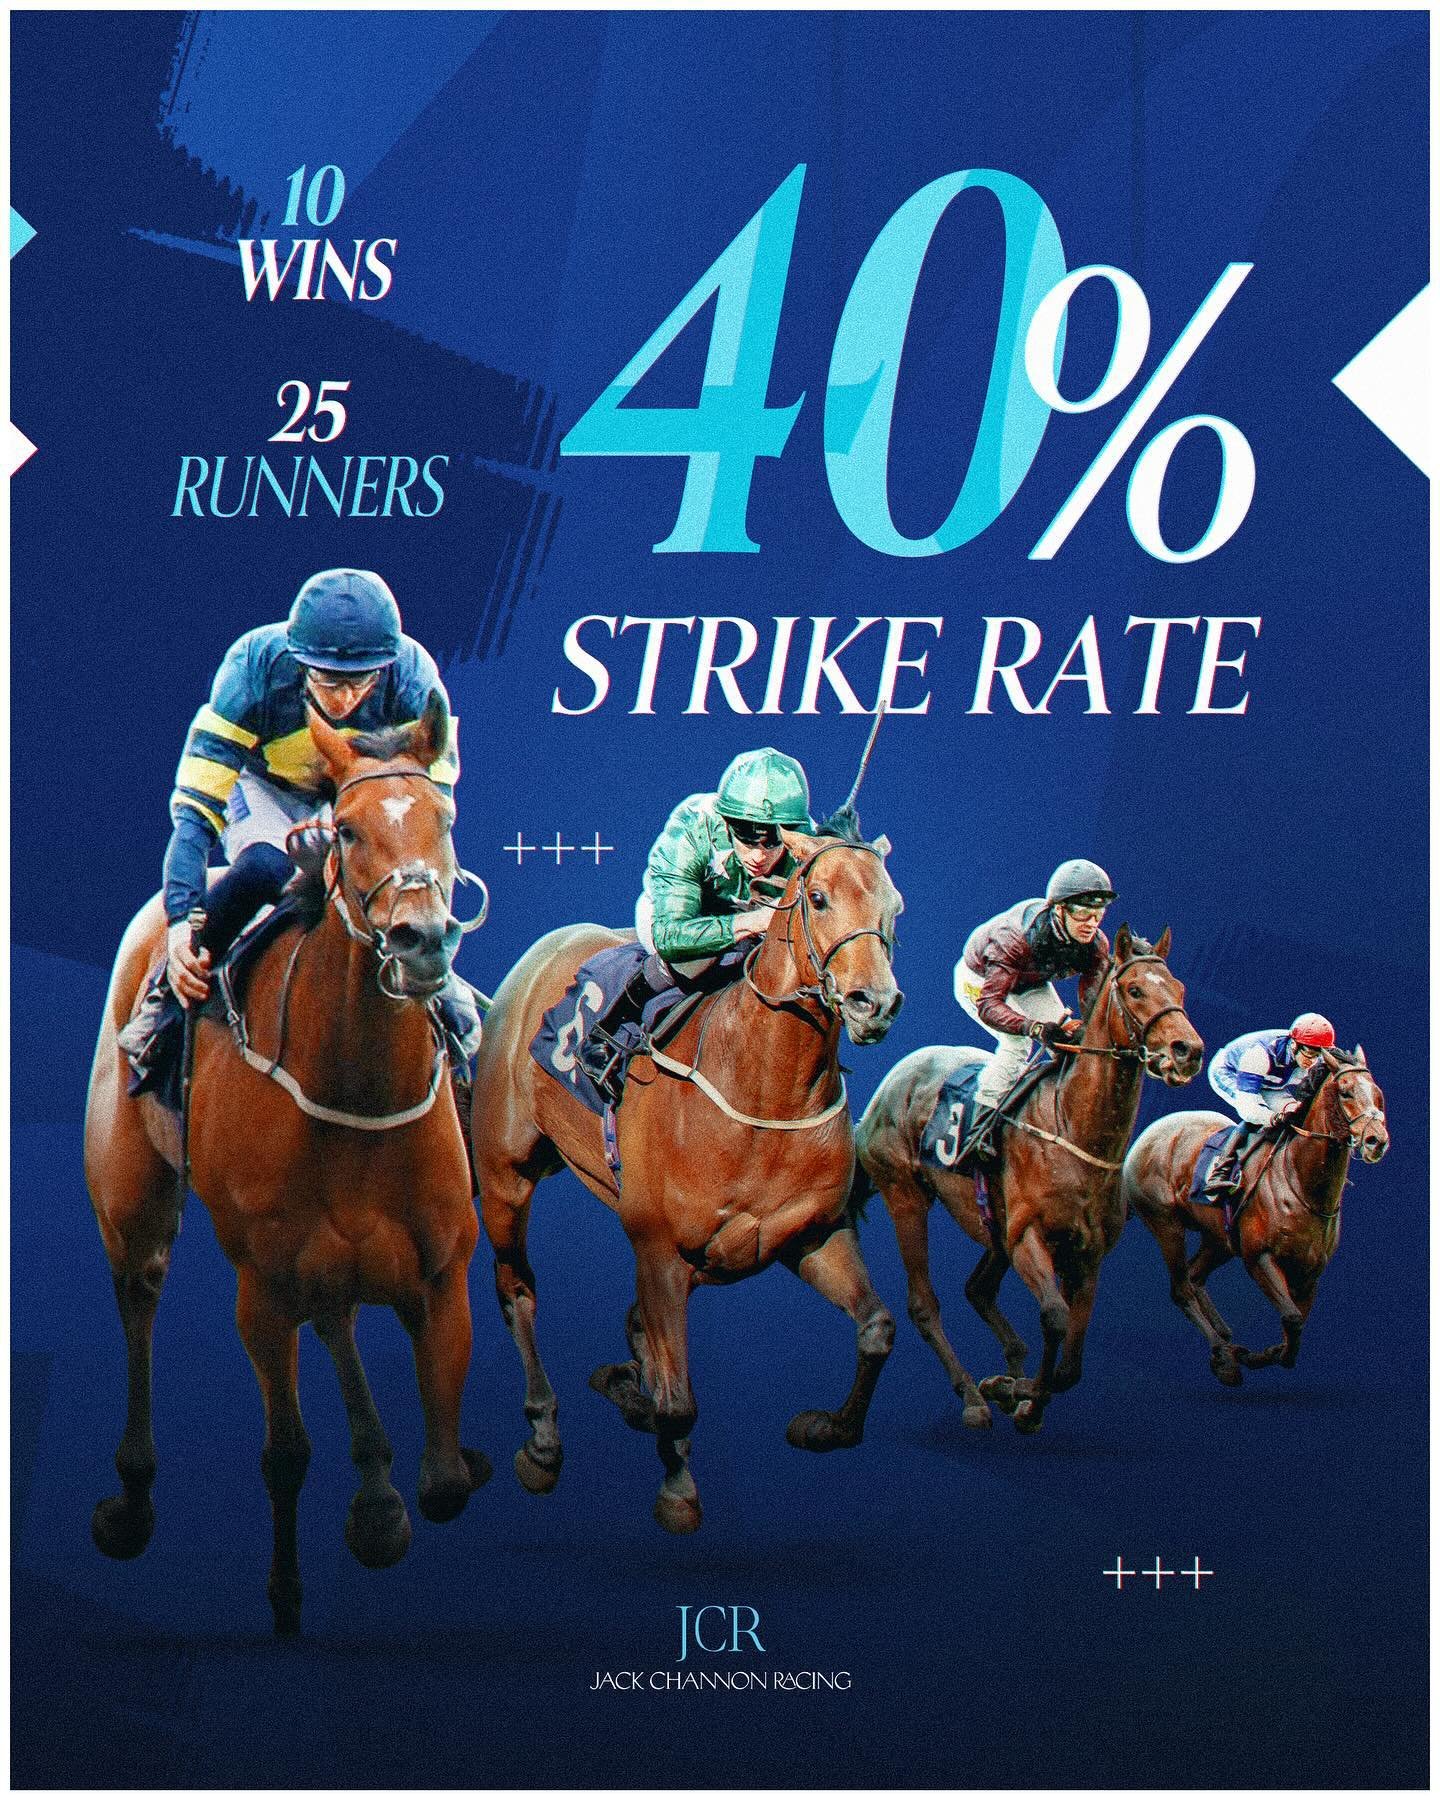 𝟰𝟬% strike rate in the last 14 days 🏆 

A big shoutout to our team for their hard work &amp; consistently delivering these results! 

#JackChannonRacing #JCR